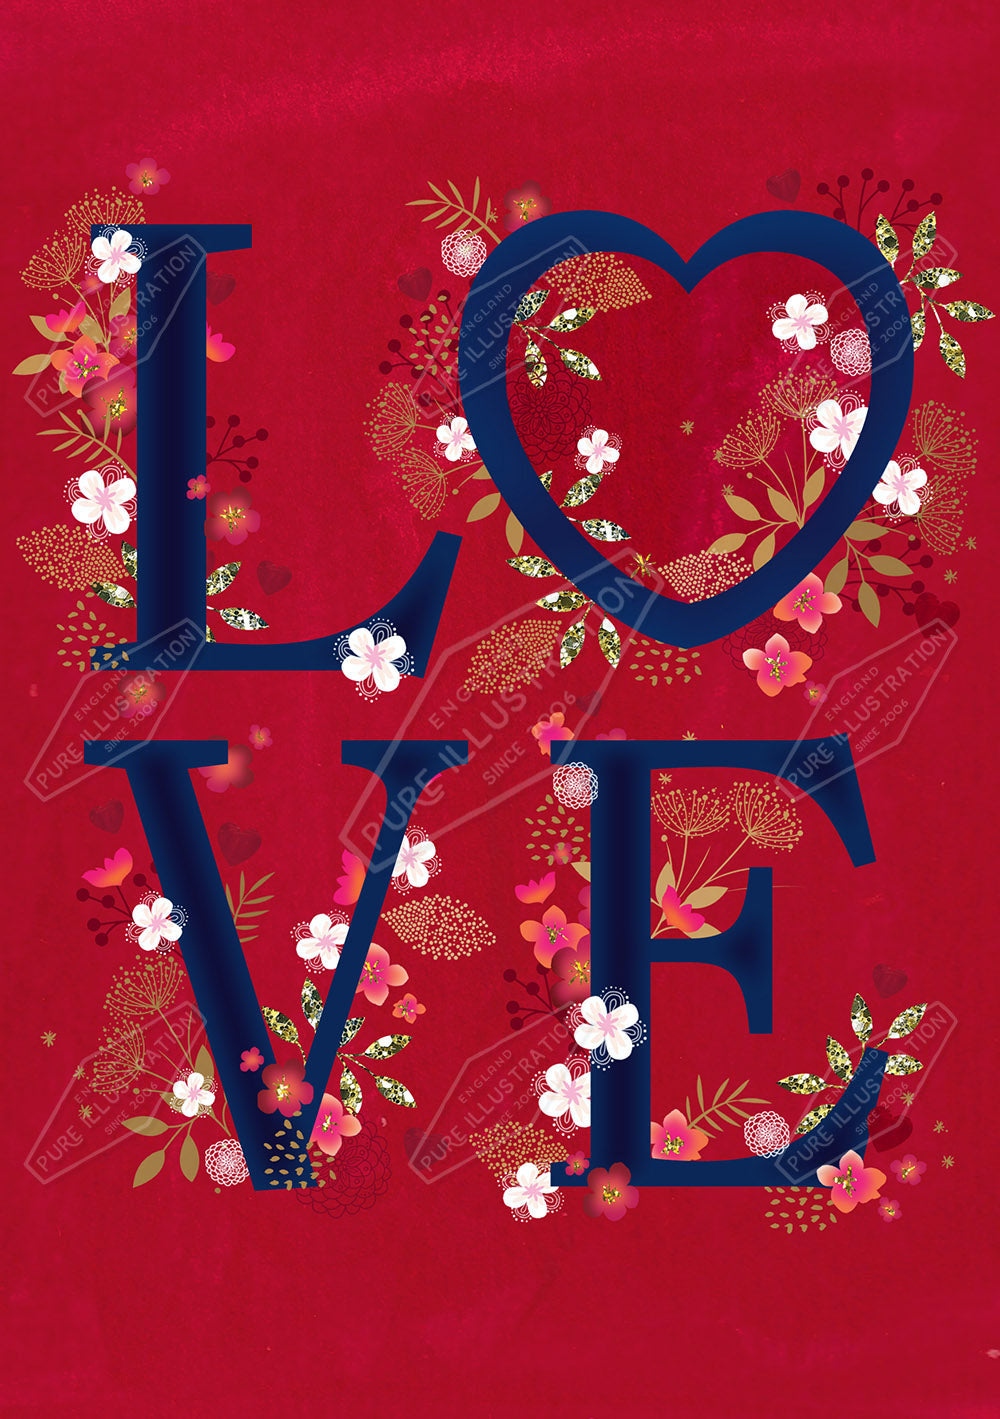 00033503KSP- Kerry Spurling is represented by Pure Art Licensing Agency - Valentine's Greeting Card Design